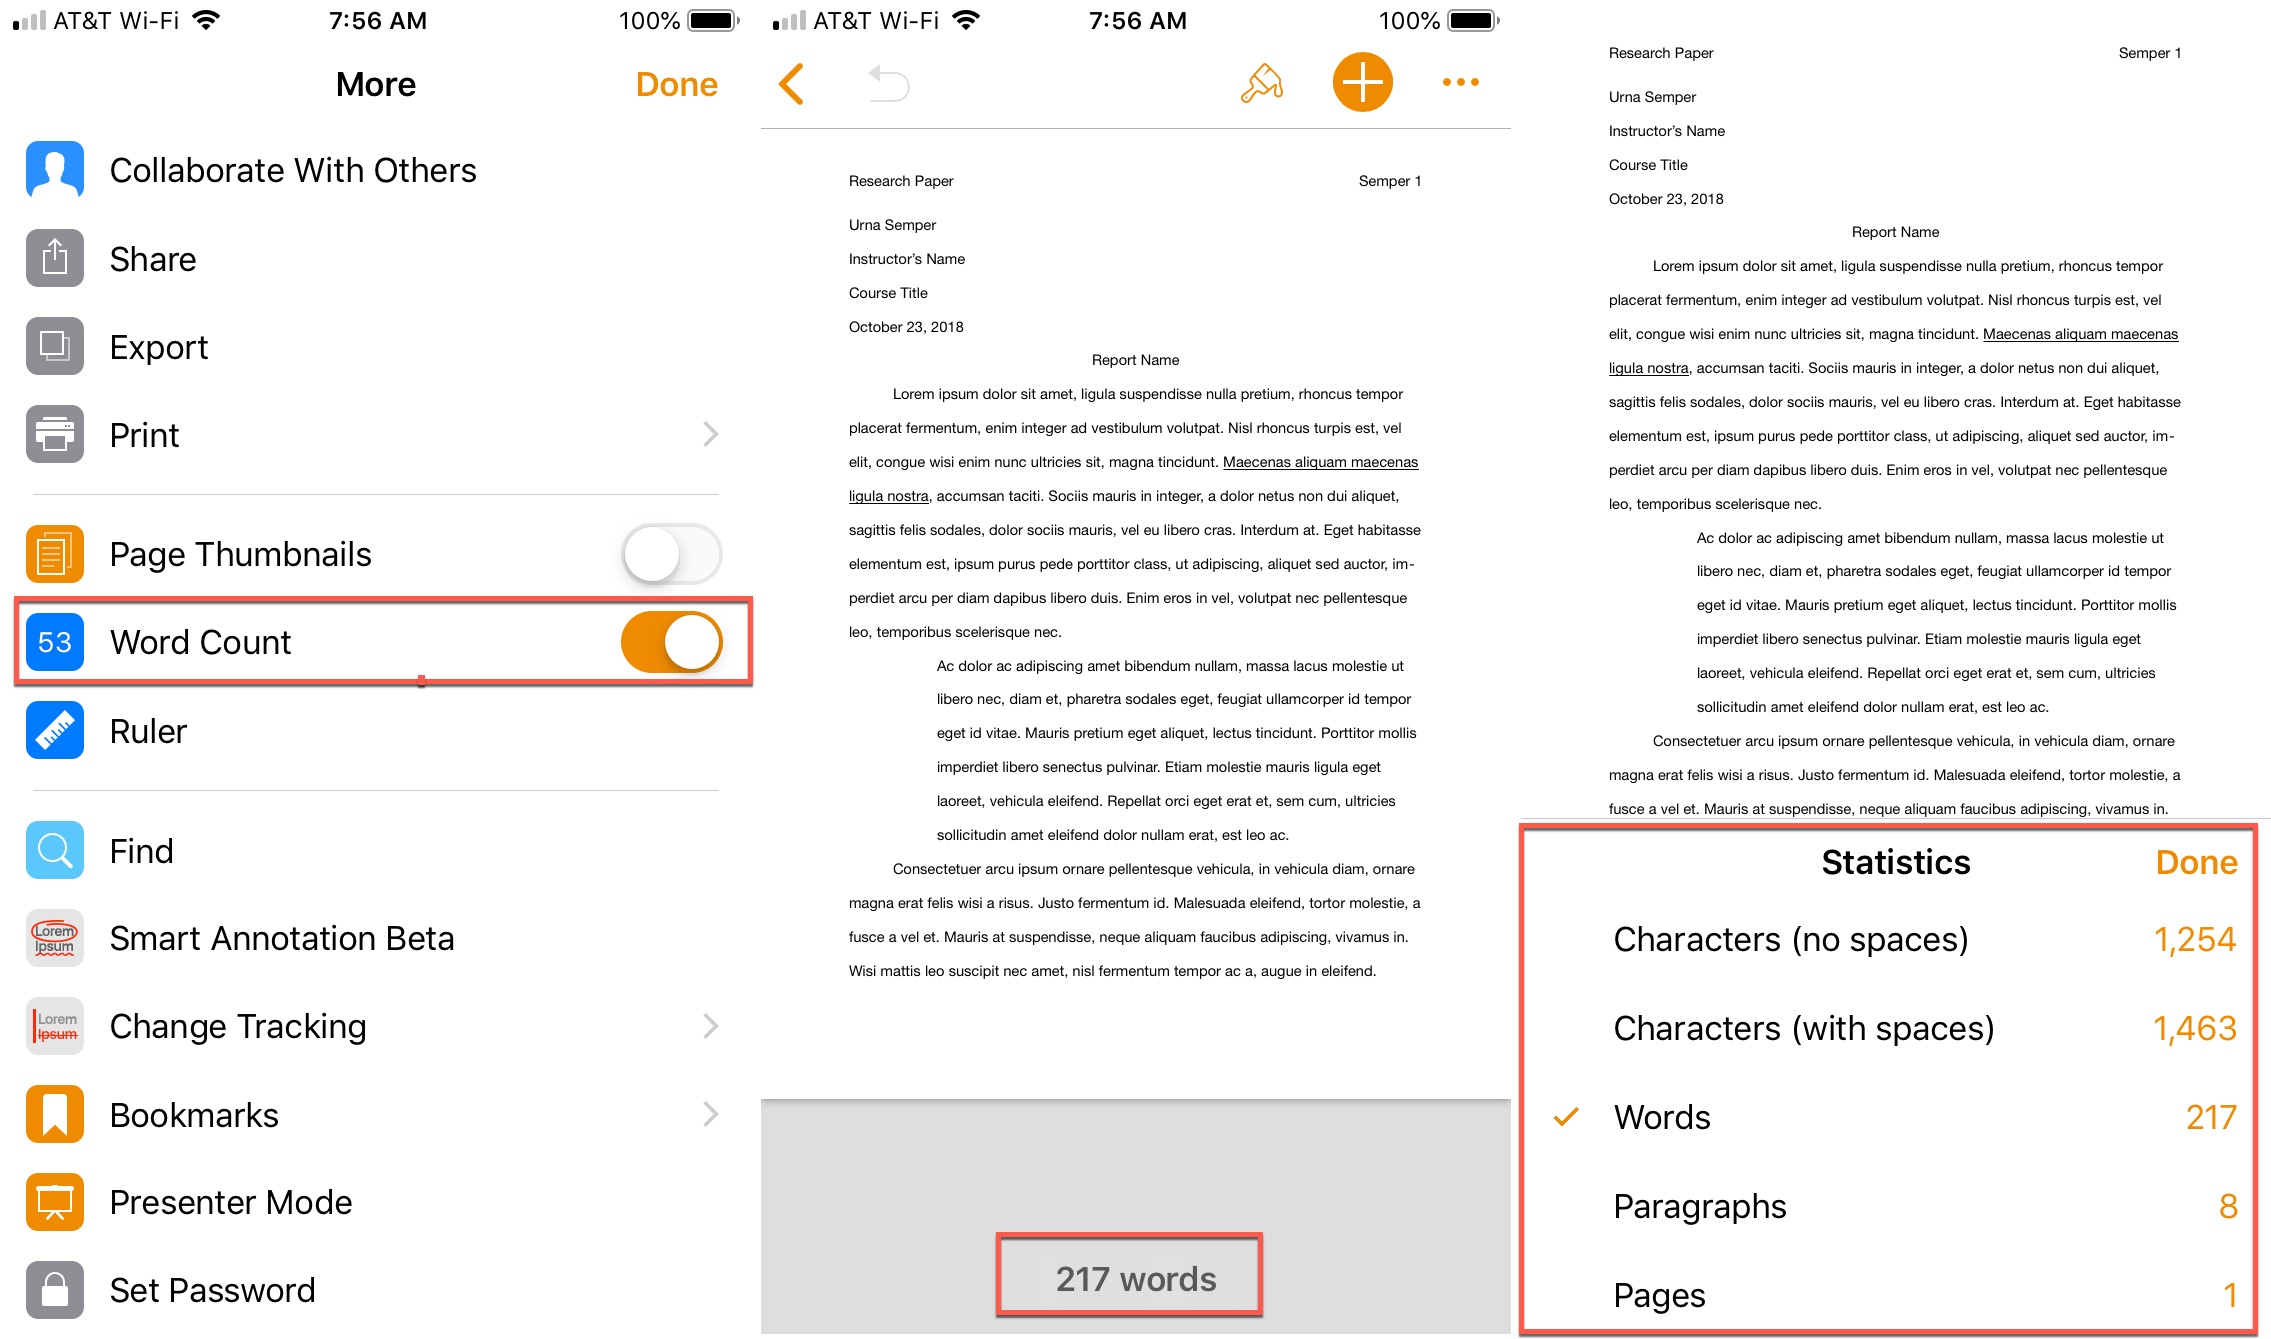 How to find Word Count in Pages on iPad